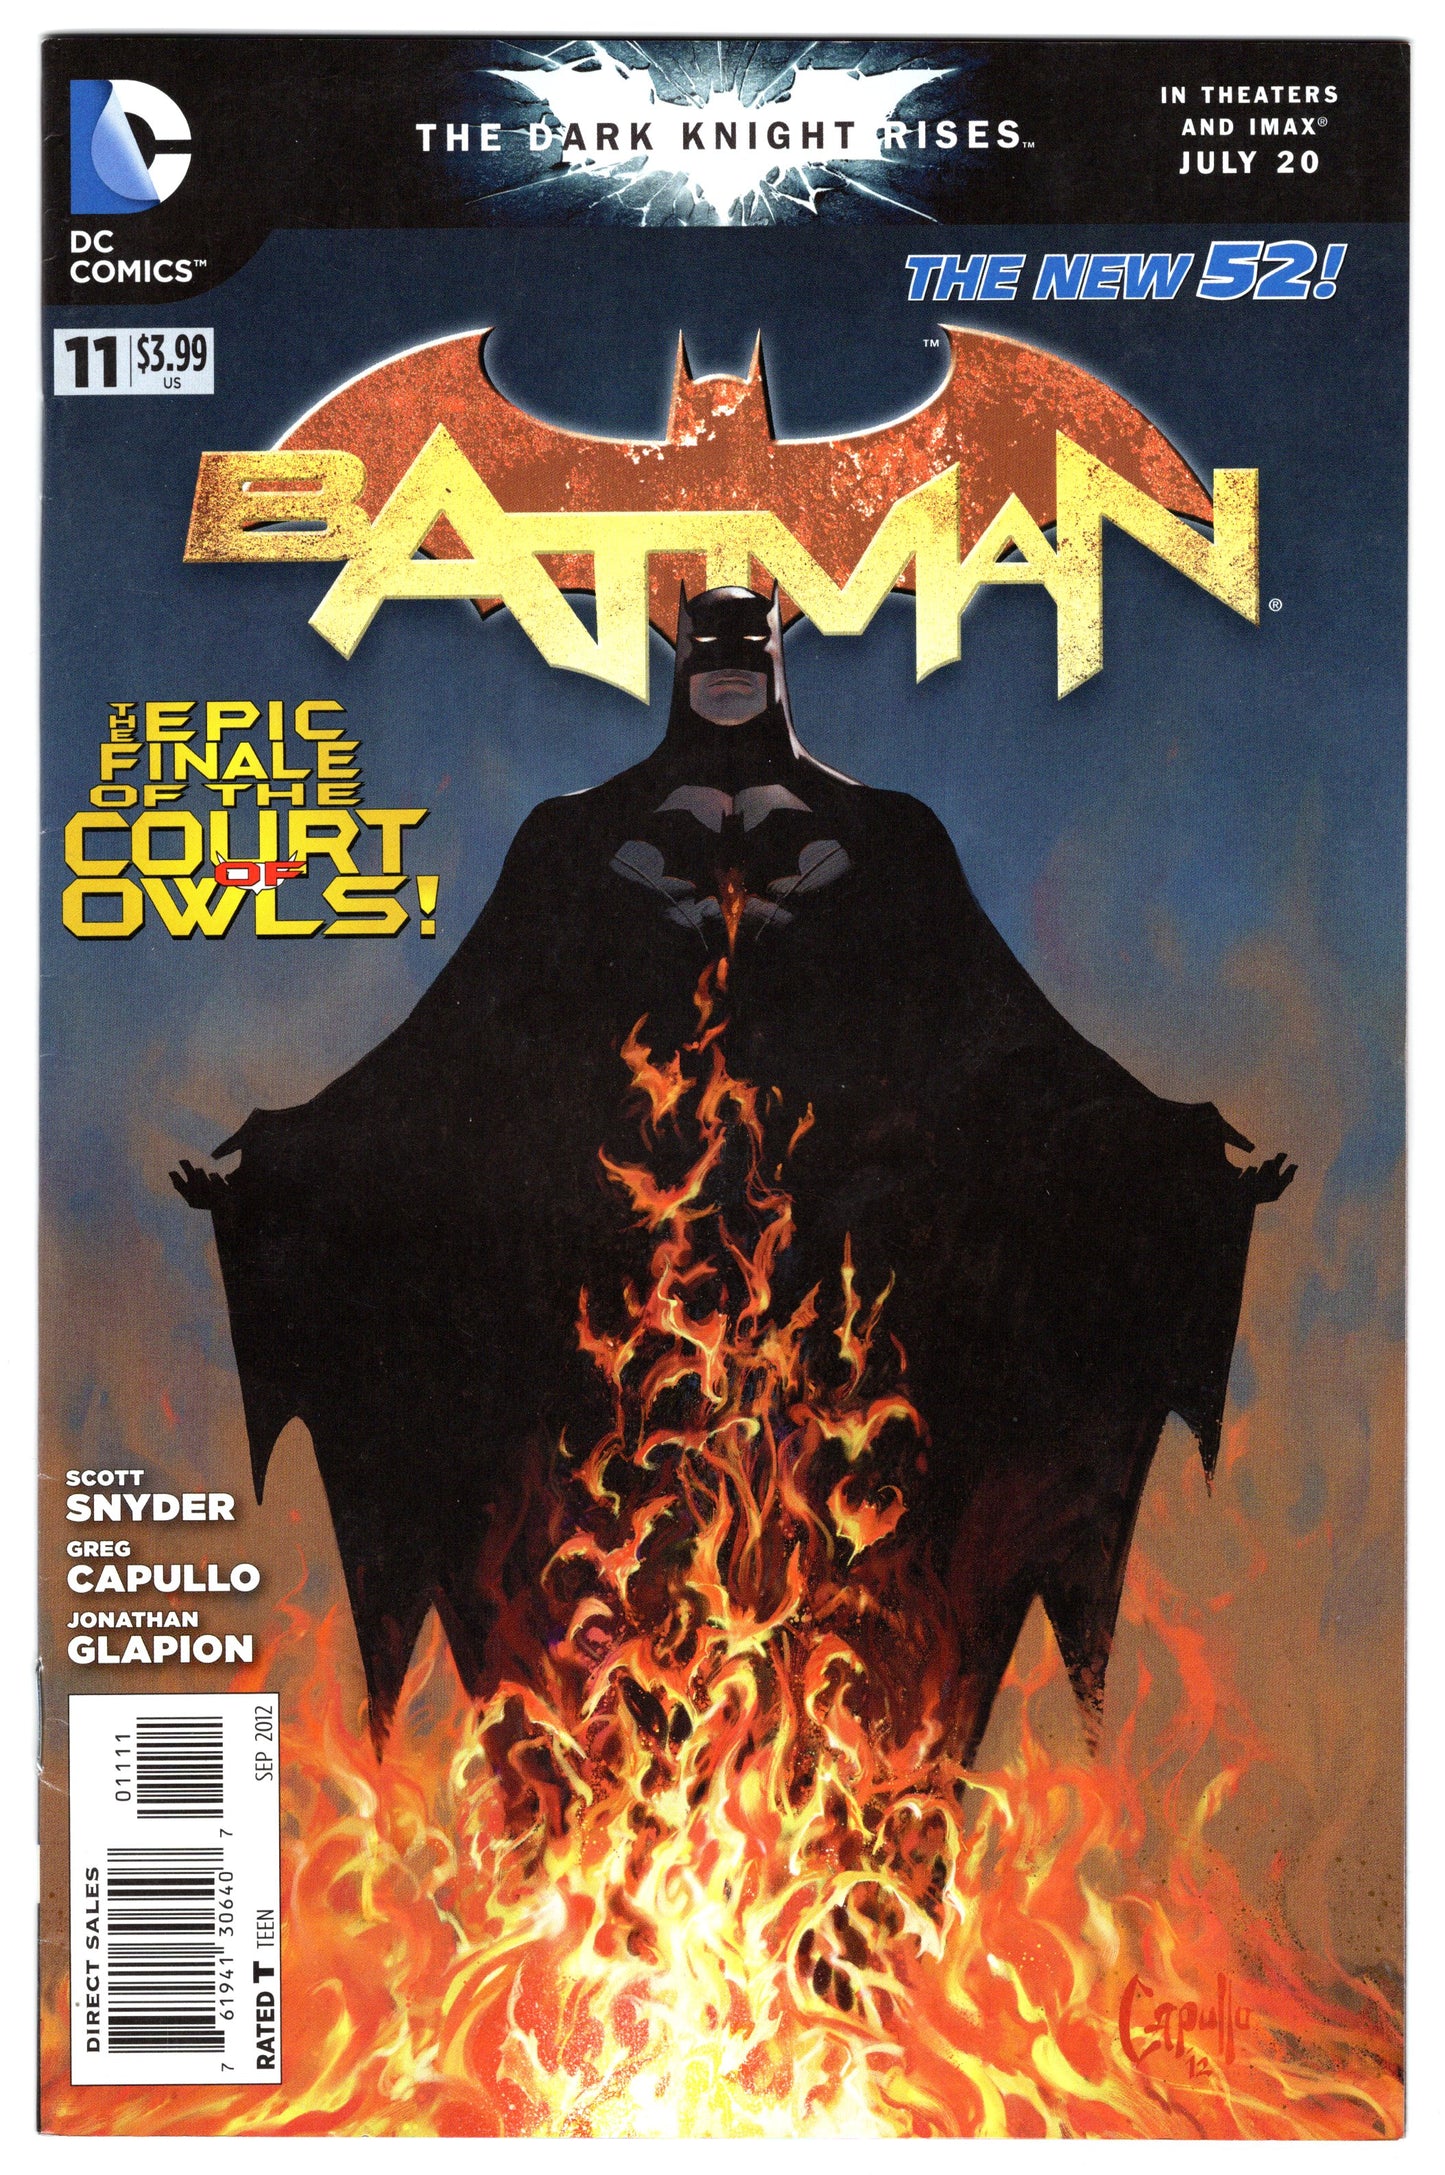 Batman - Issue #11 "The New 52!"  (Sept. 2012 - DC Universe) VF